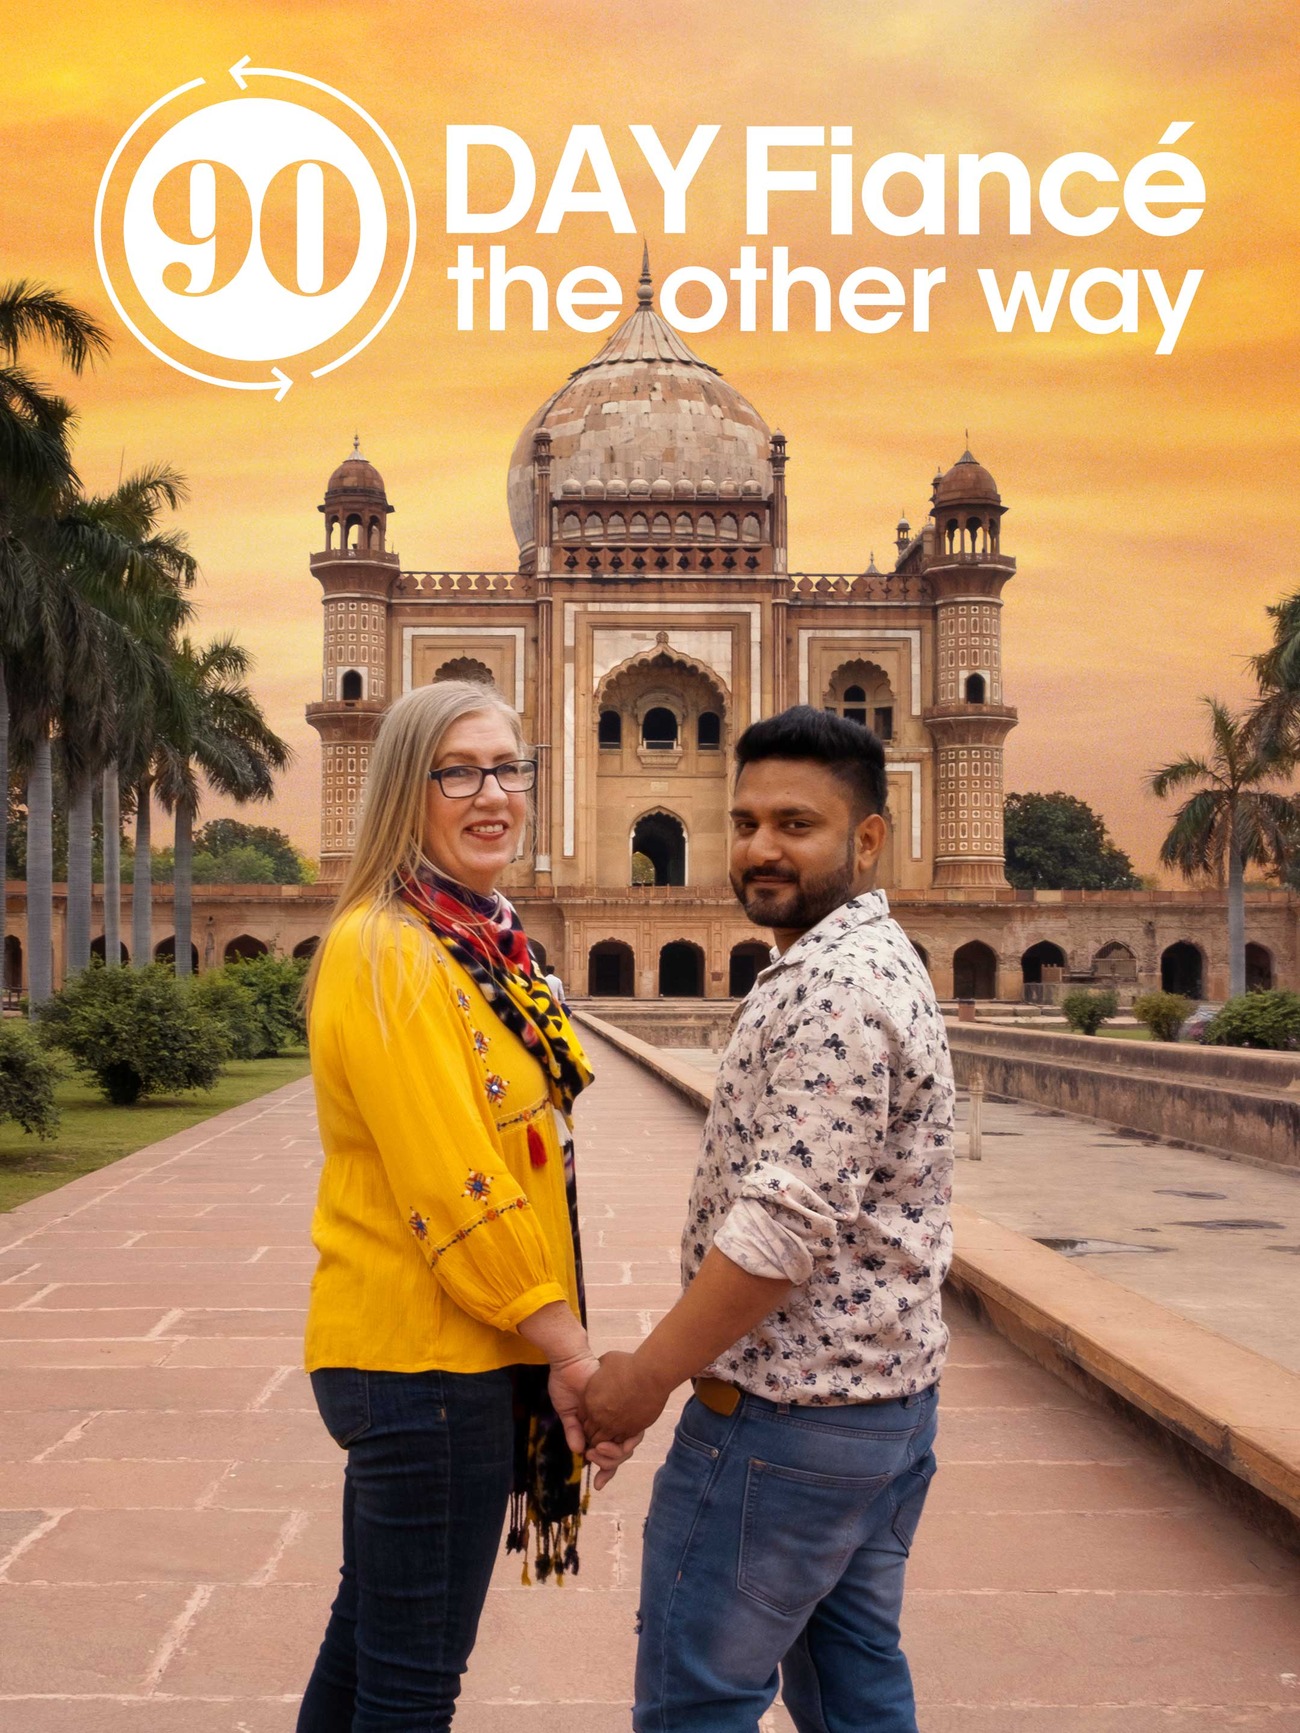 90 Day Fiancé: The Other Way - Season 2